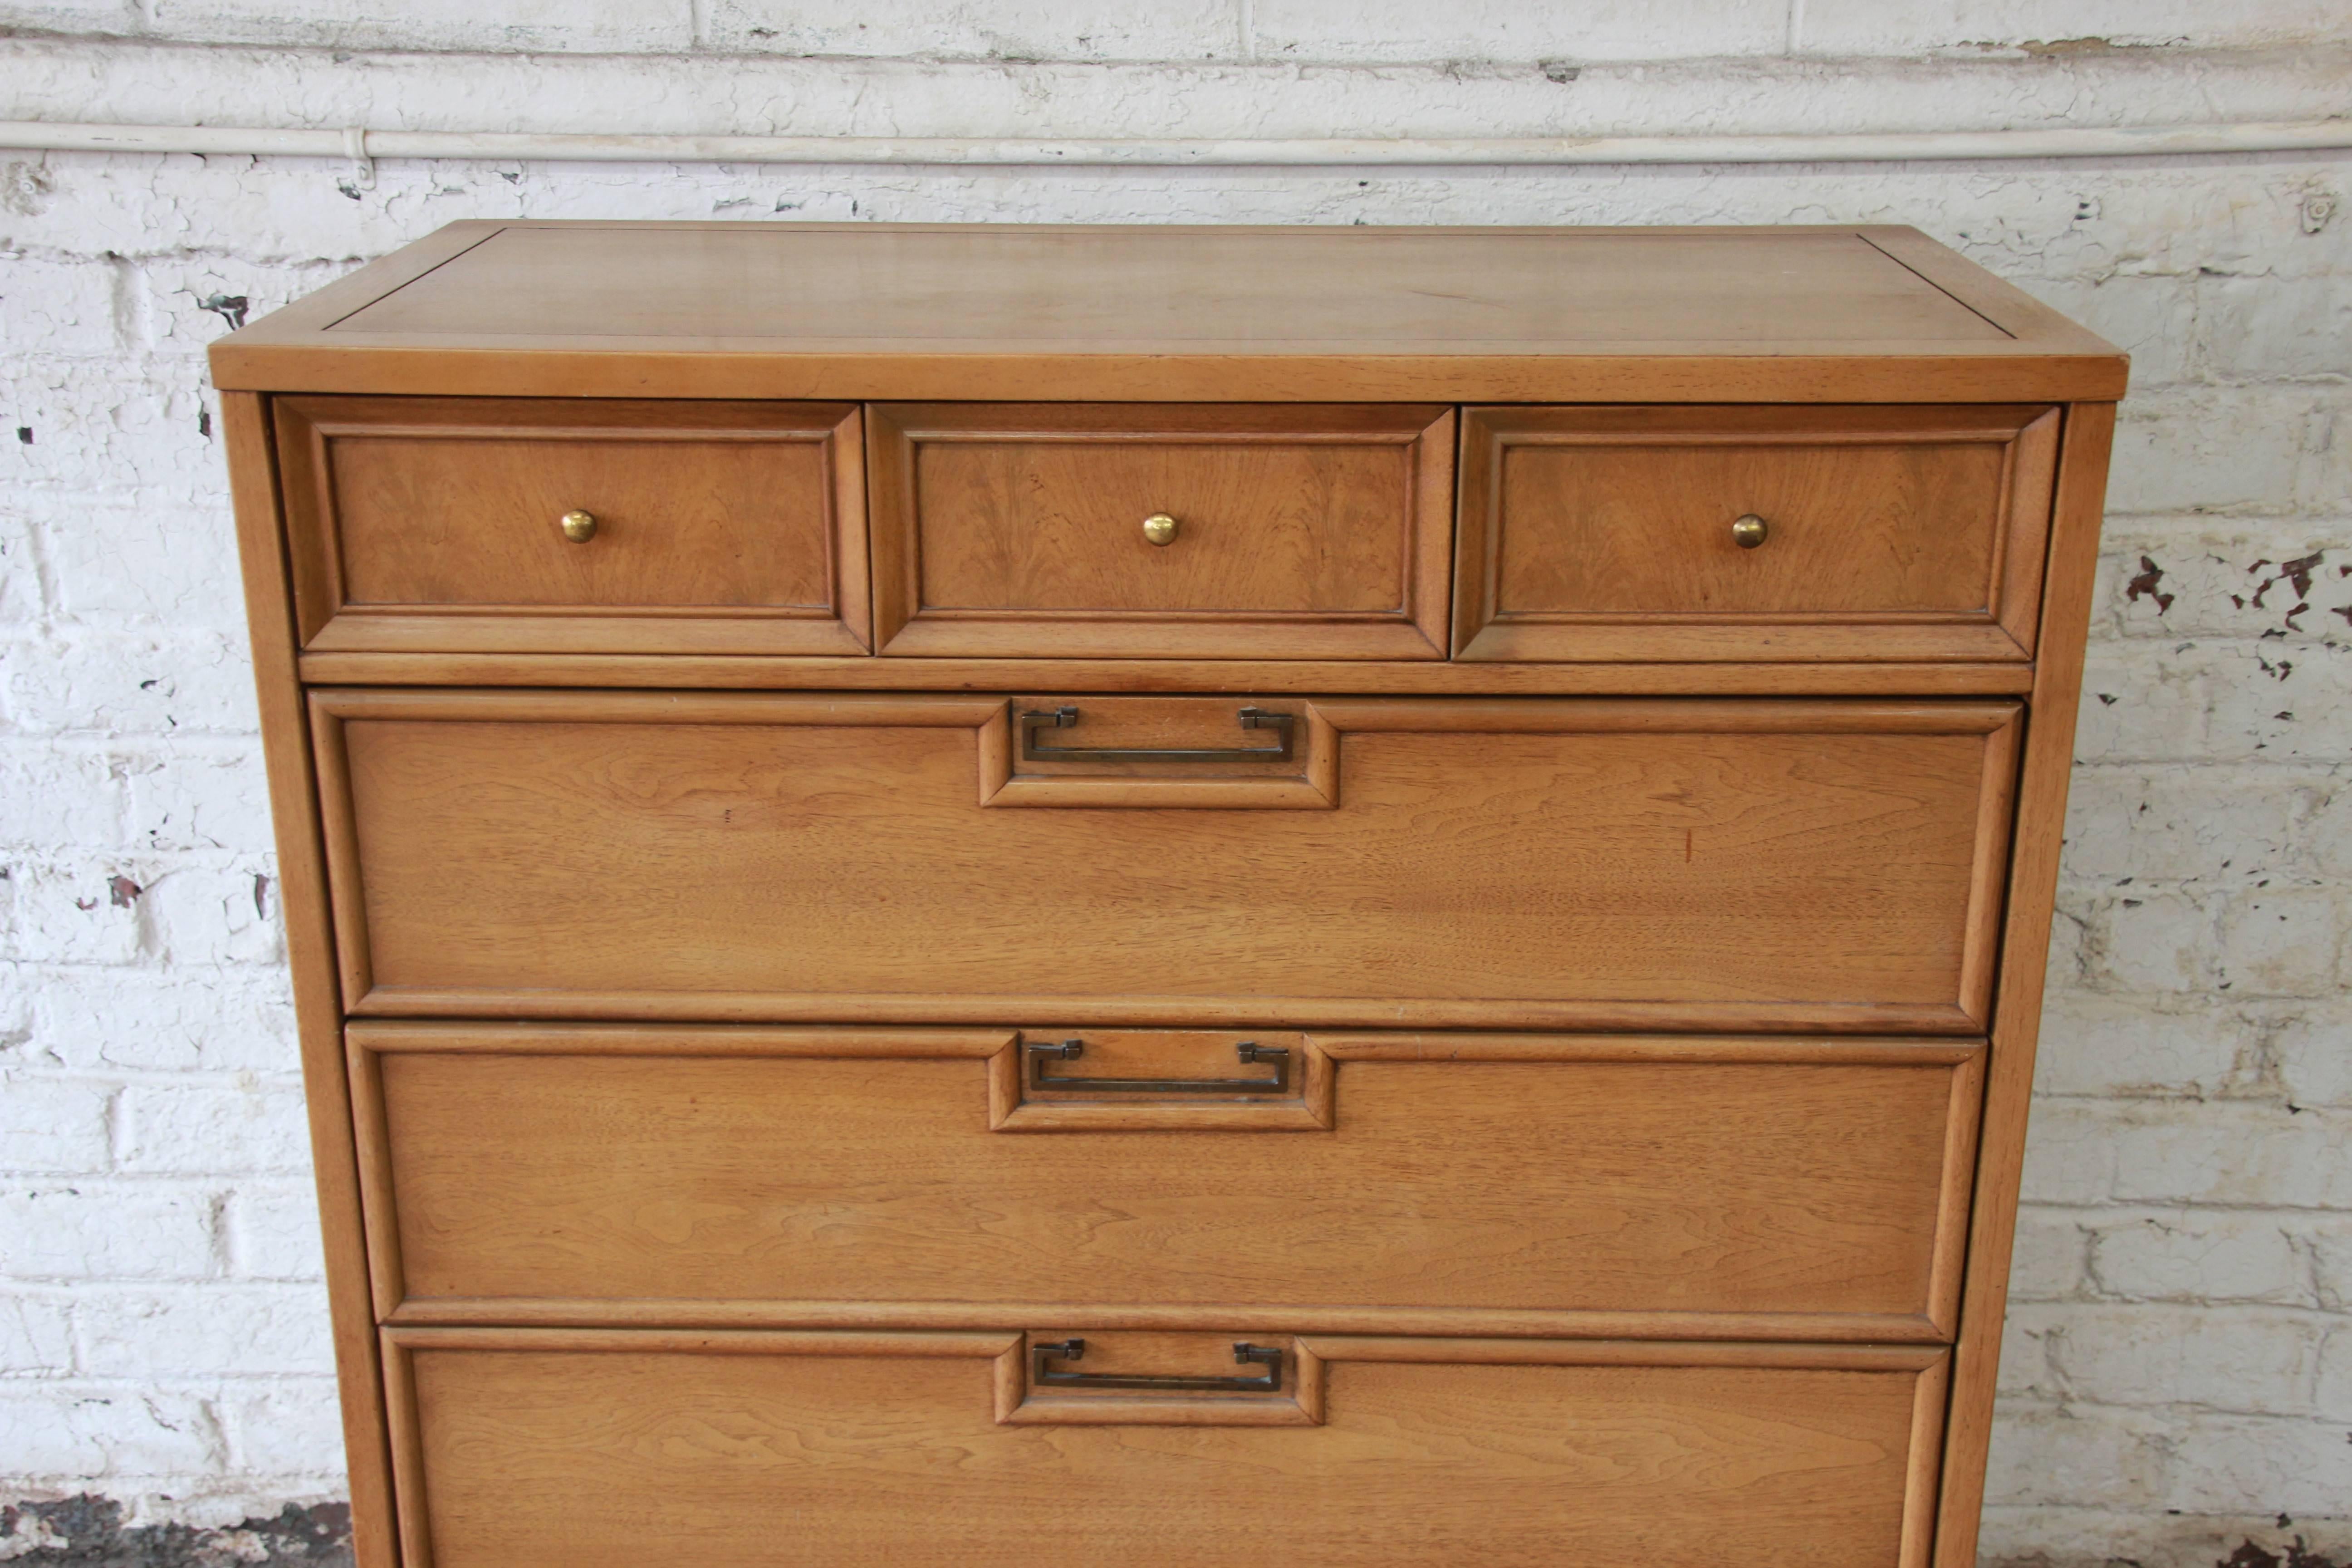 Bleached Mid-Century Modern Chinoiserie Highboy Dresser by American of Martinsville